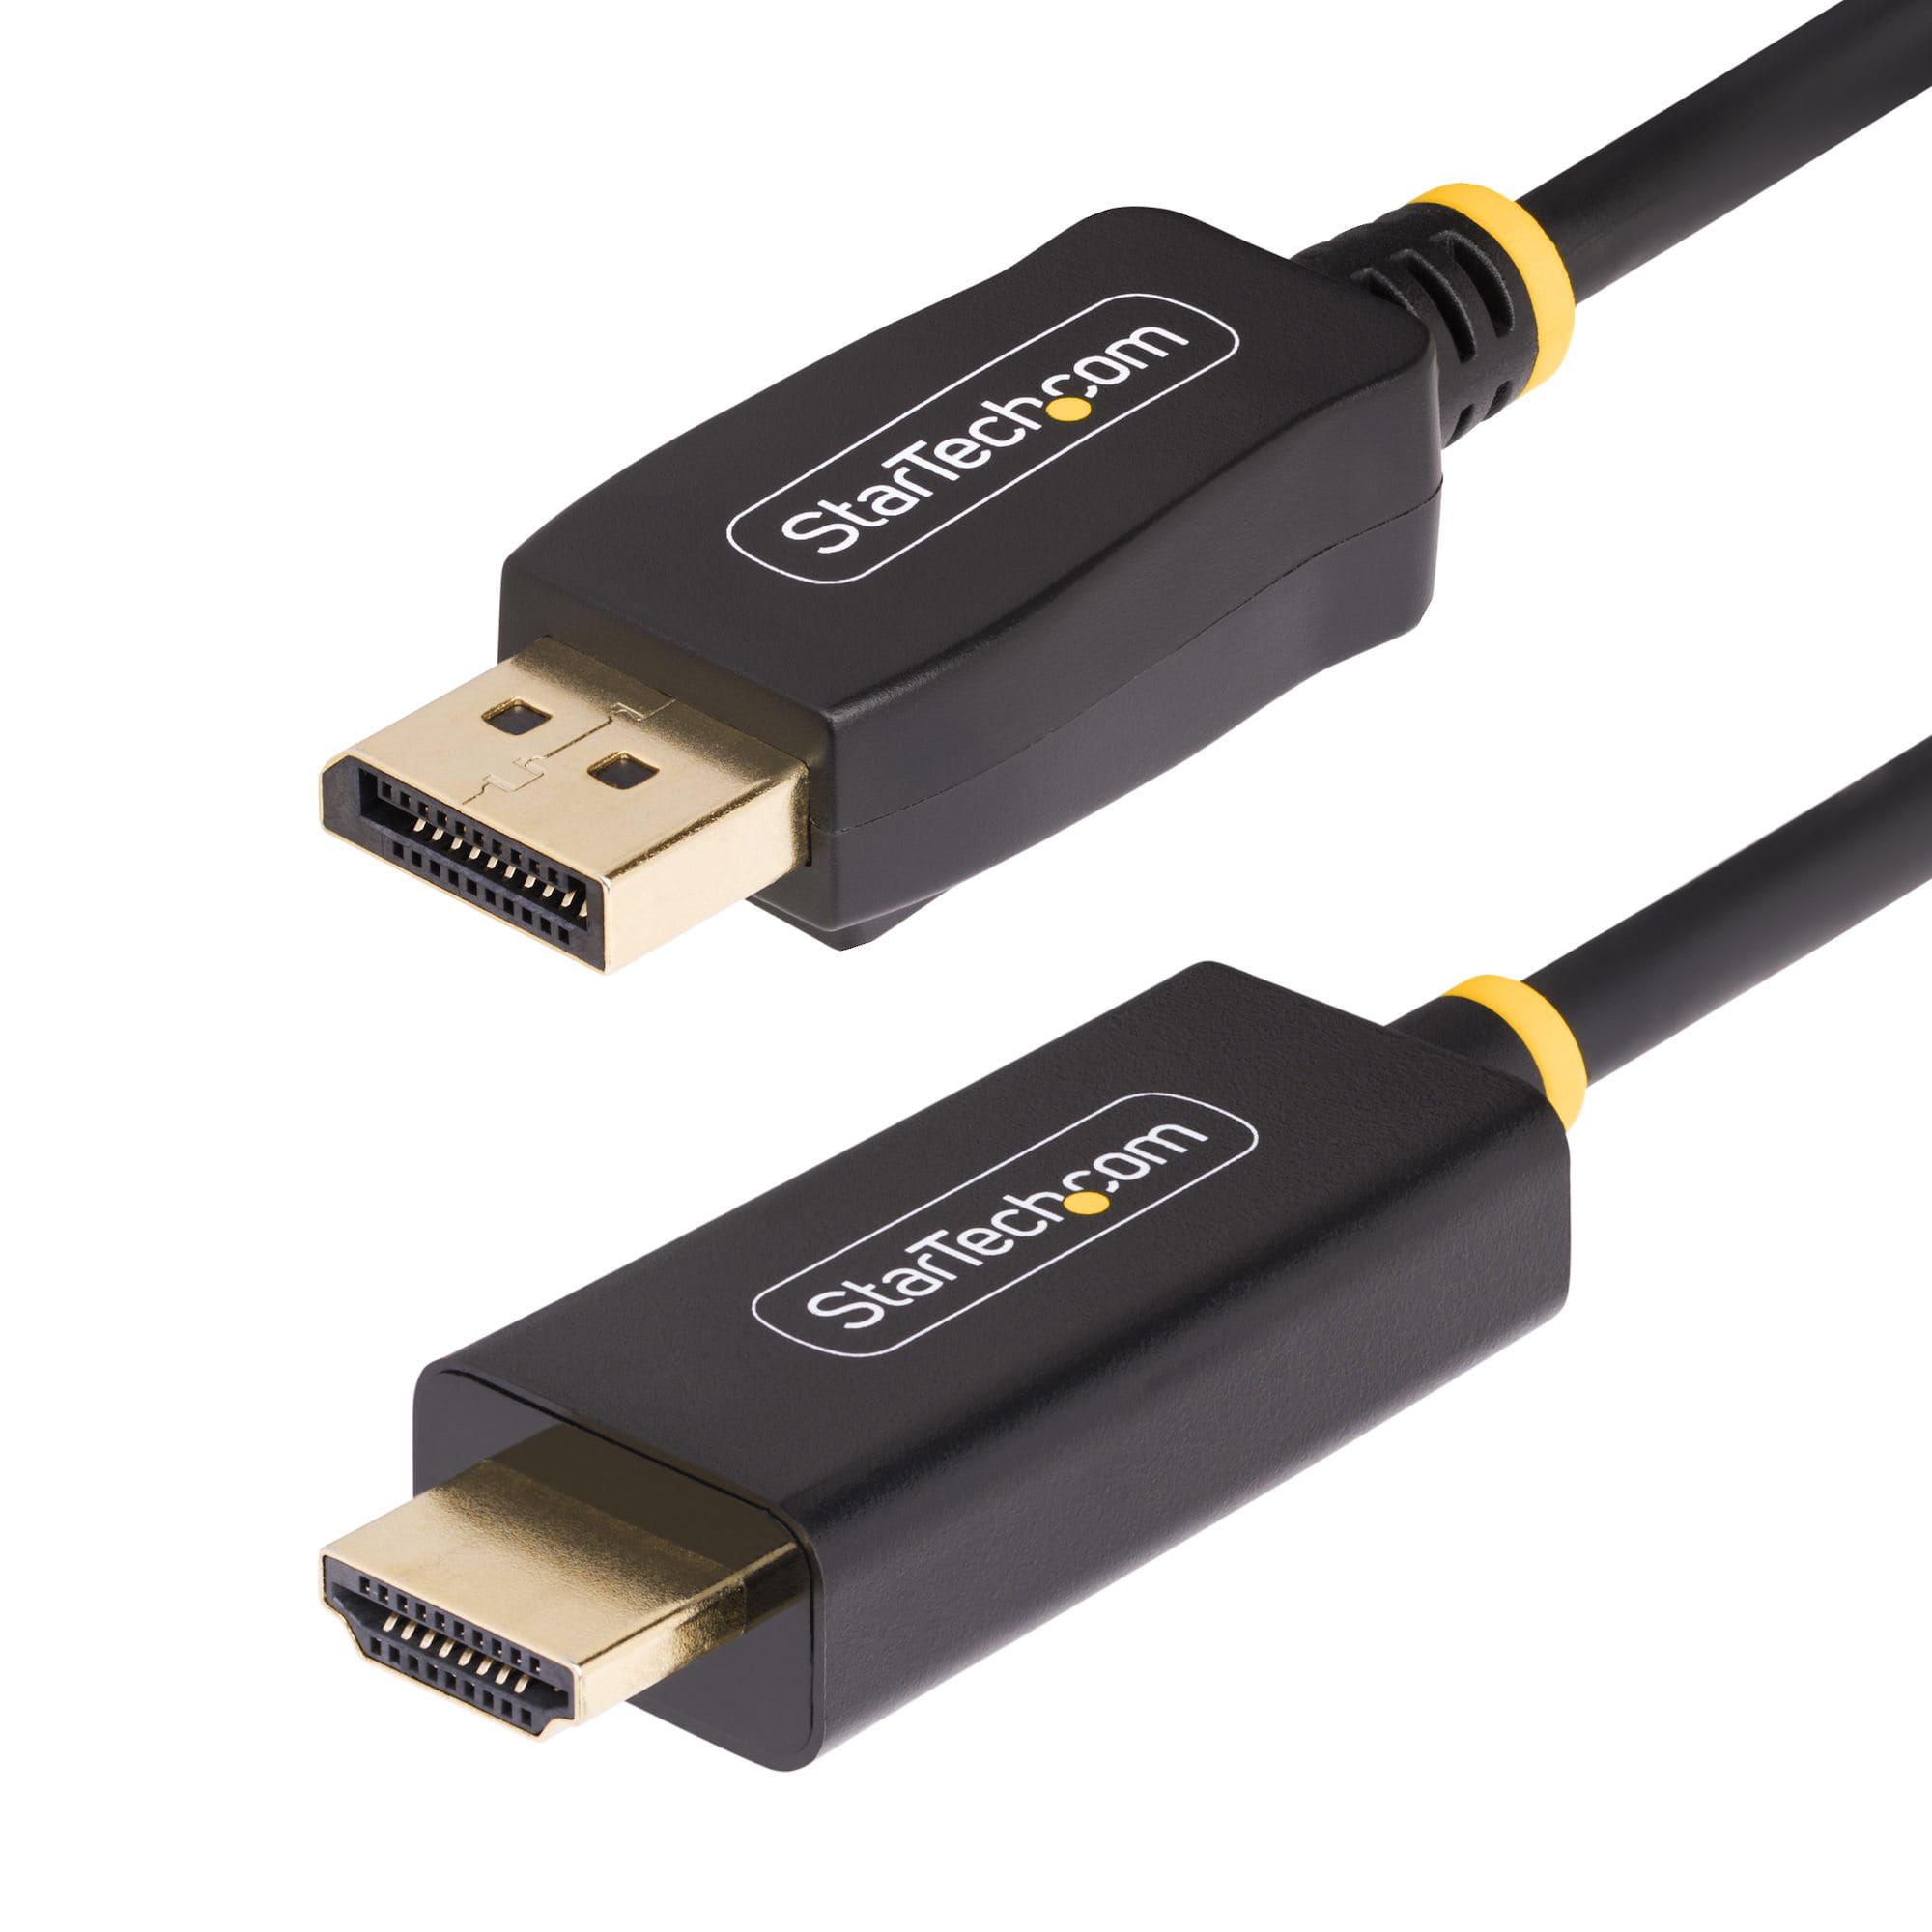 StarTech.com 6.6ft (2m) DisplayPort to HDMI Adapter Cable, 4K 60Hz with HDR, DP to HDMI 2.0b, Active Video Converter, DisplayPort Desktop to HDMI Monitor, M/M - DisplayPort to HDMI Cord (6F-DP-HDMI-4K60-HDR)